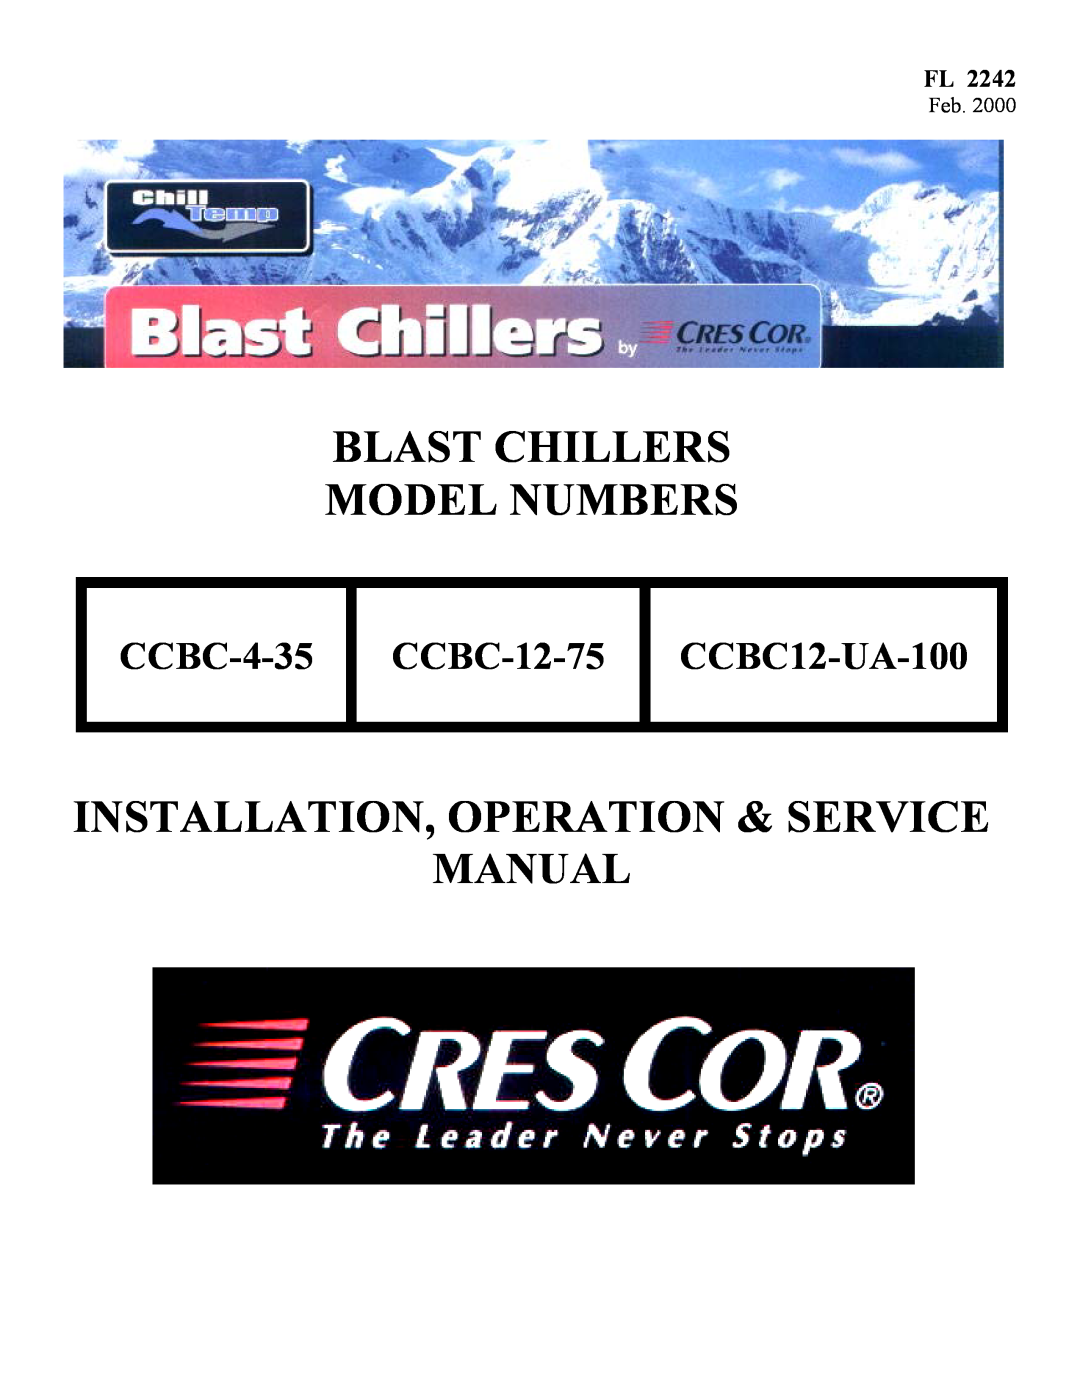 Cres Cor service manual CCBC-4-35 CCBC-12-75 CCBC12-UA-100, Blast Chillers Model Numbers, Manual 